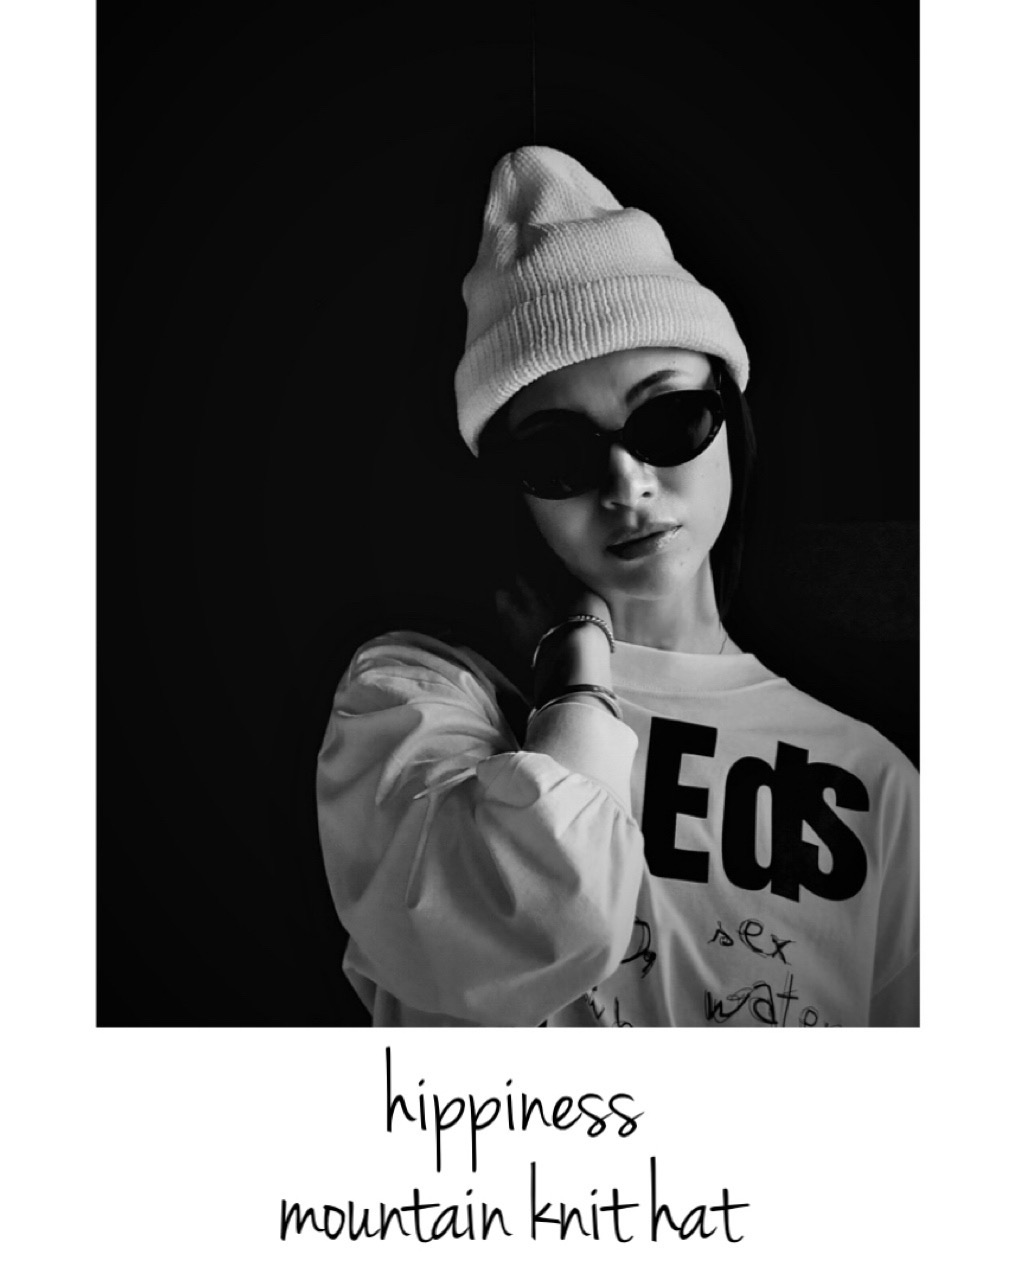 "hippiness" mountain knit hat